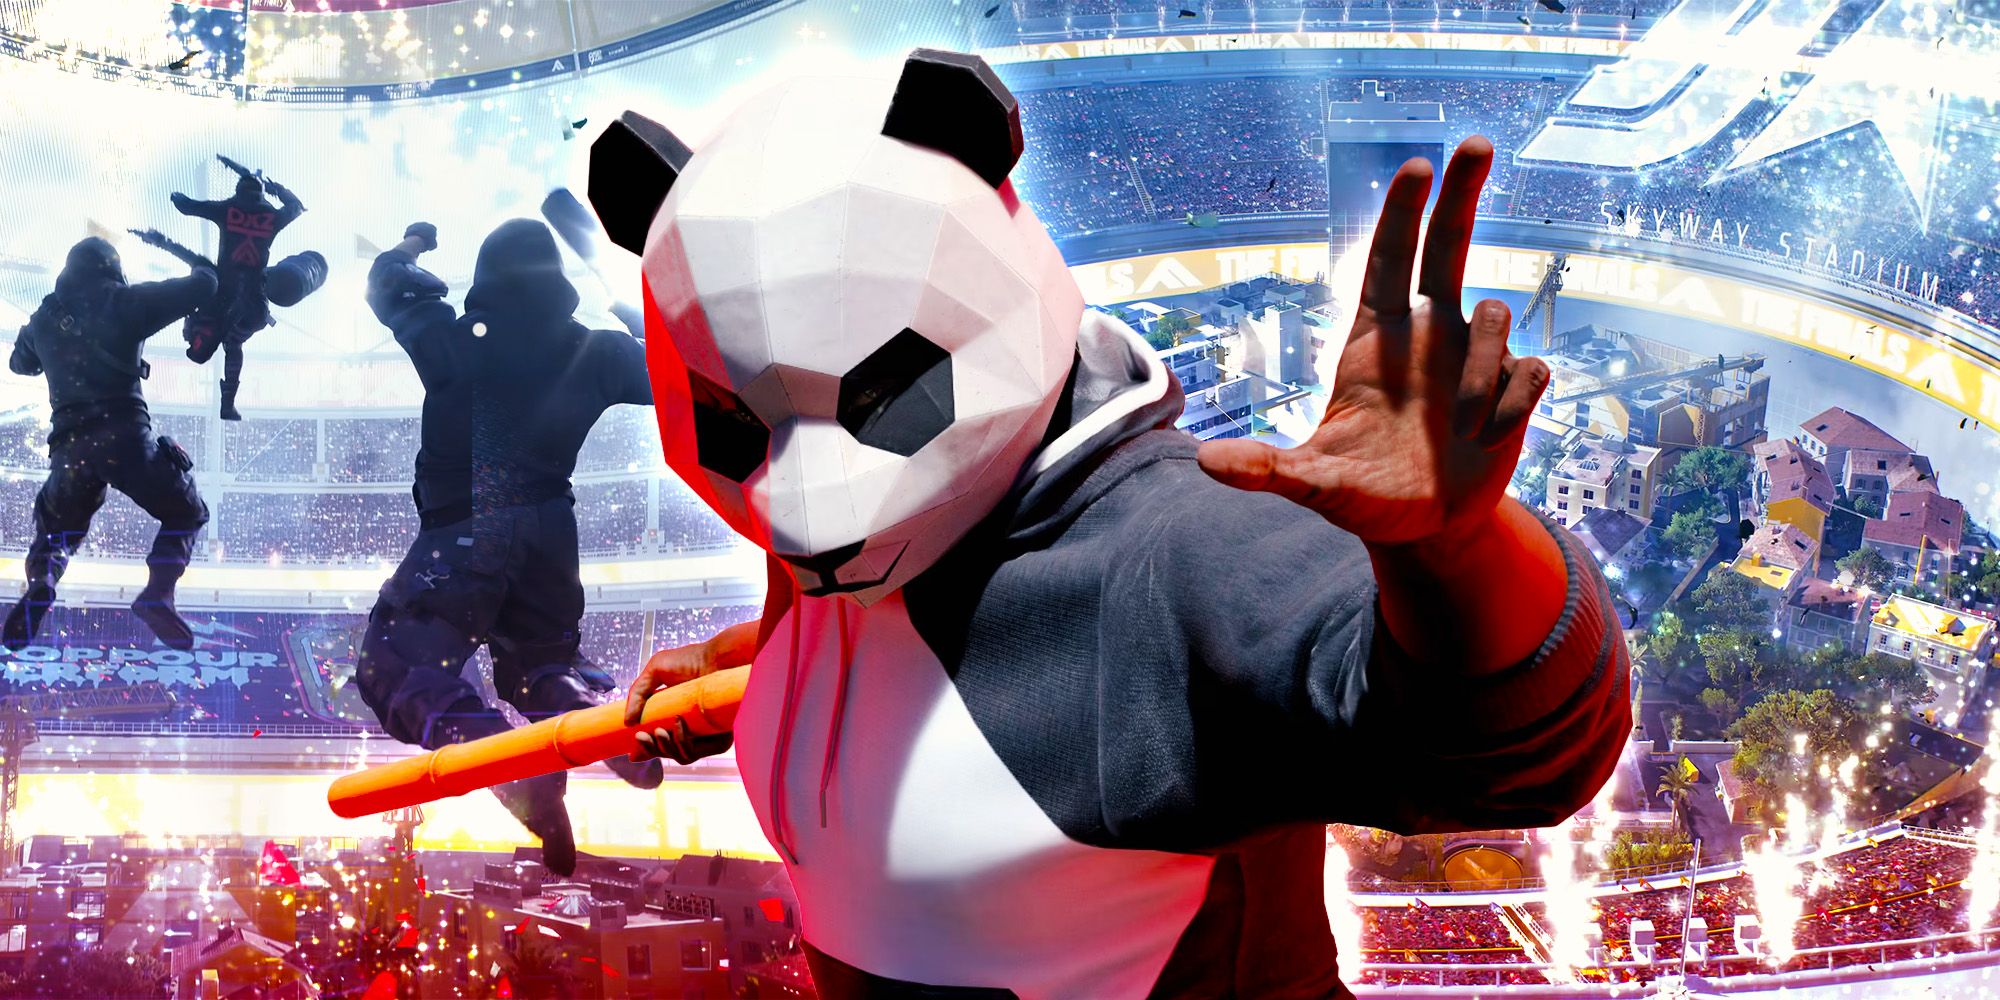 A person dressed in a panda bear costume with people fighting in the background. 